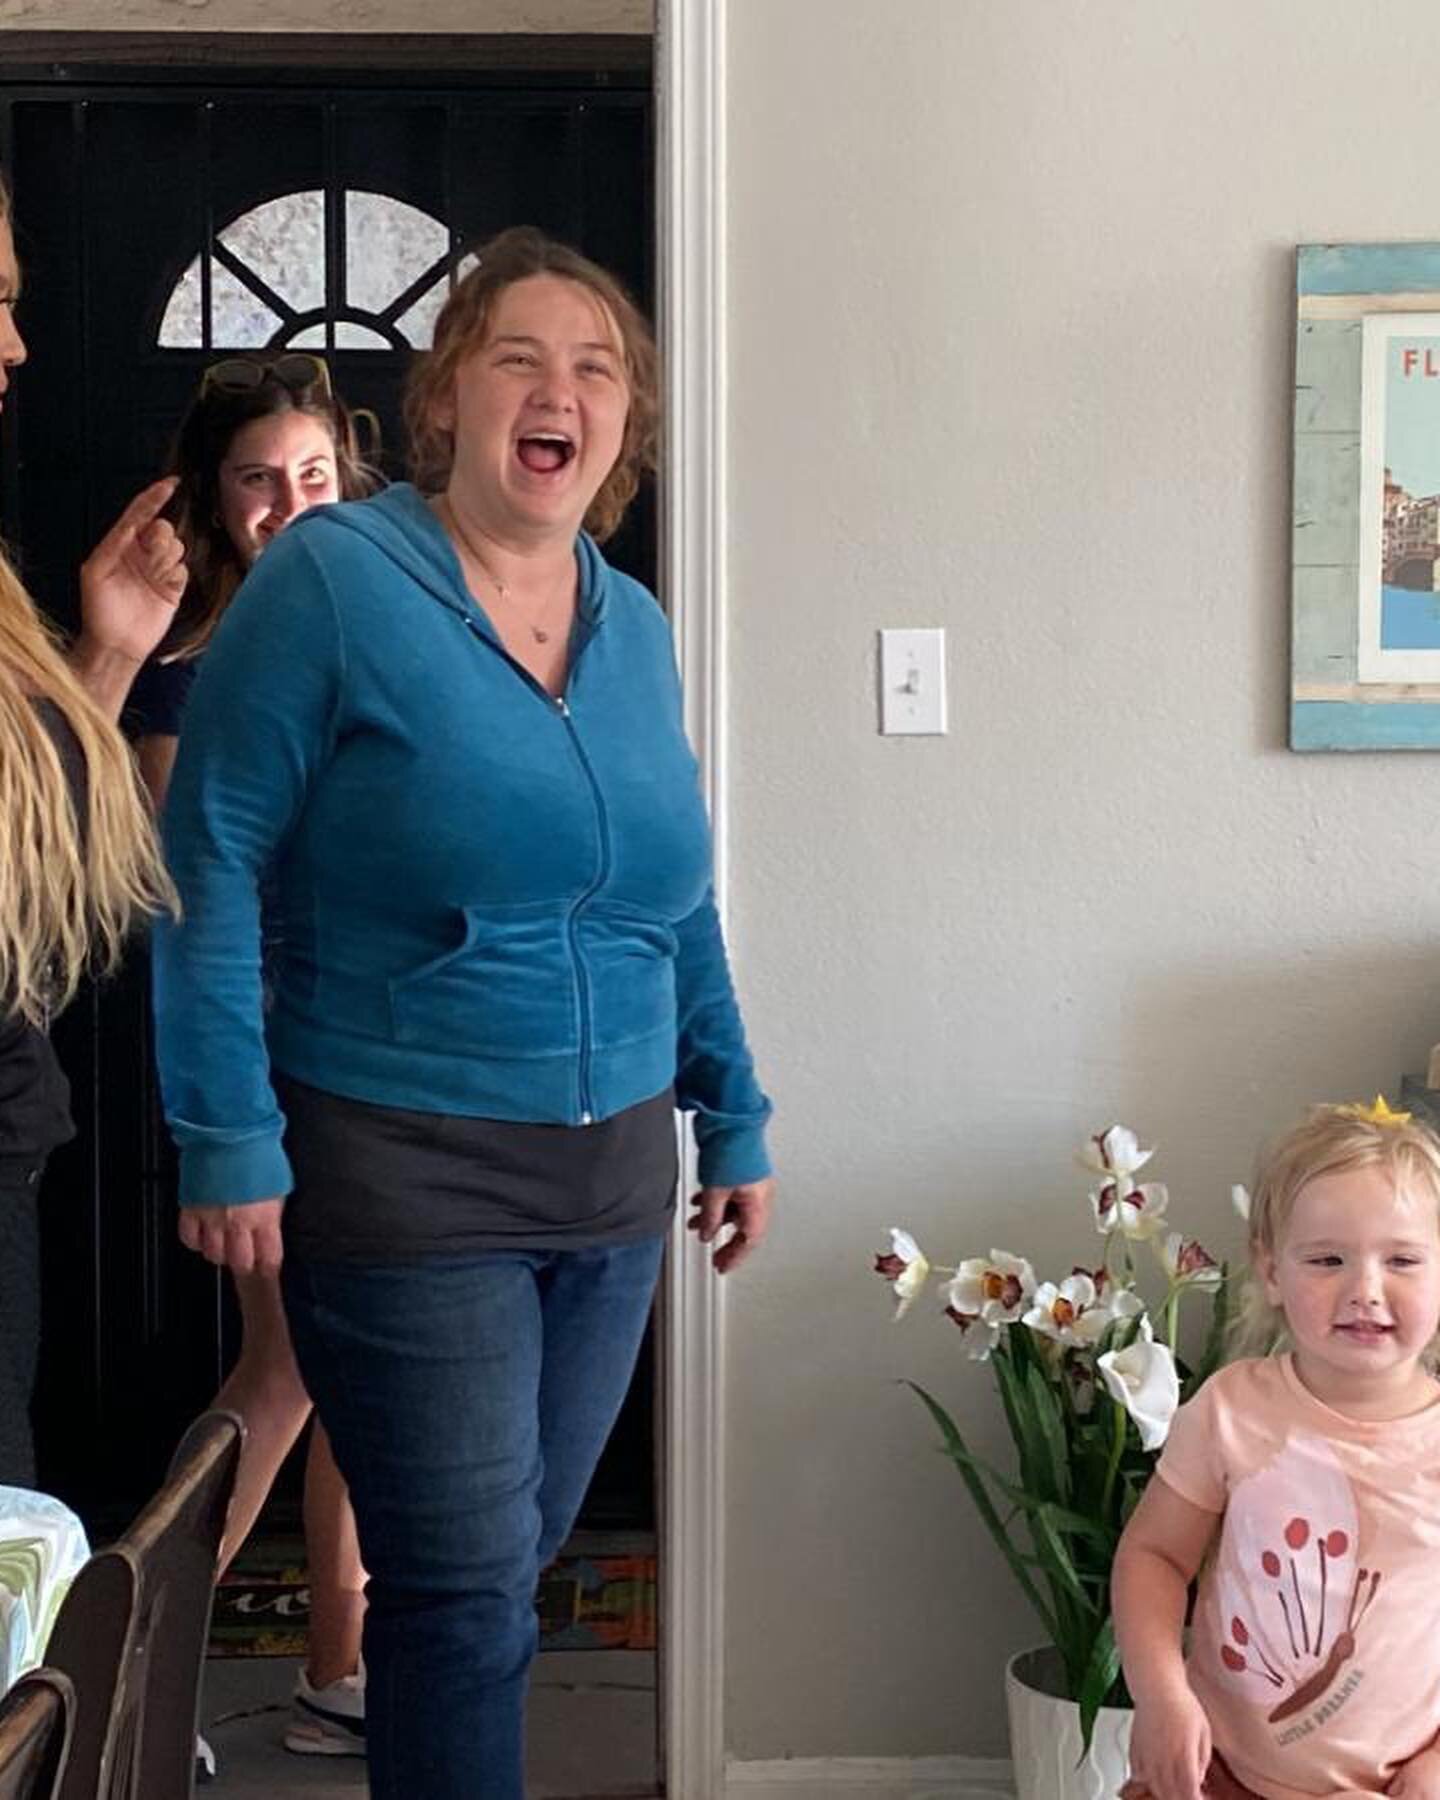 🧡 Welcome Home, Kora 🧡
.
Last Friday for our annual Mother's Day Humble Day of Service with our dear friends at @ljcsc, we welcomed Kora into her newly-transformed home. We hope you saw the coverage from @abc10news for this special day...here is Ko